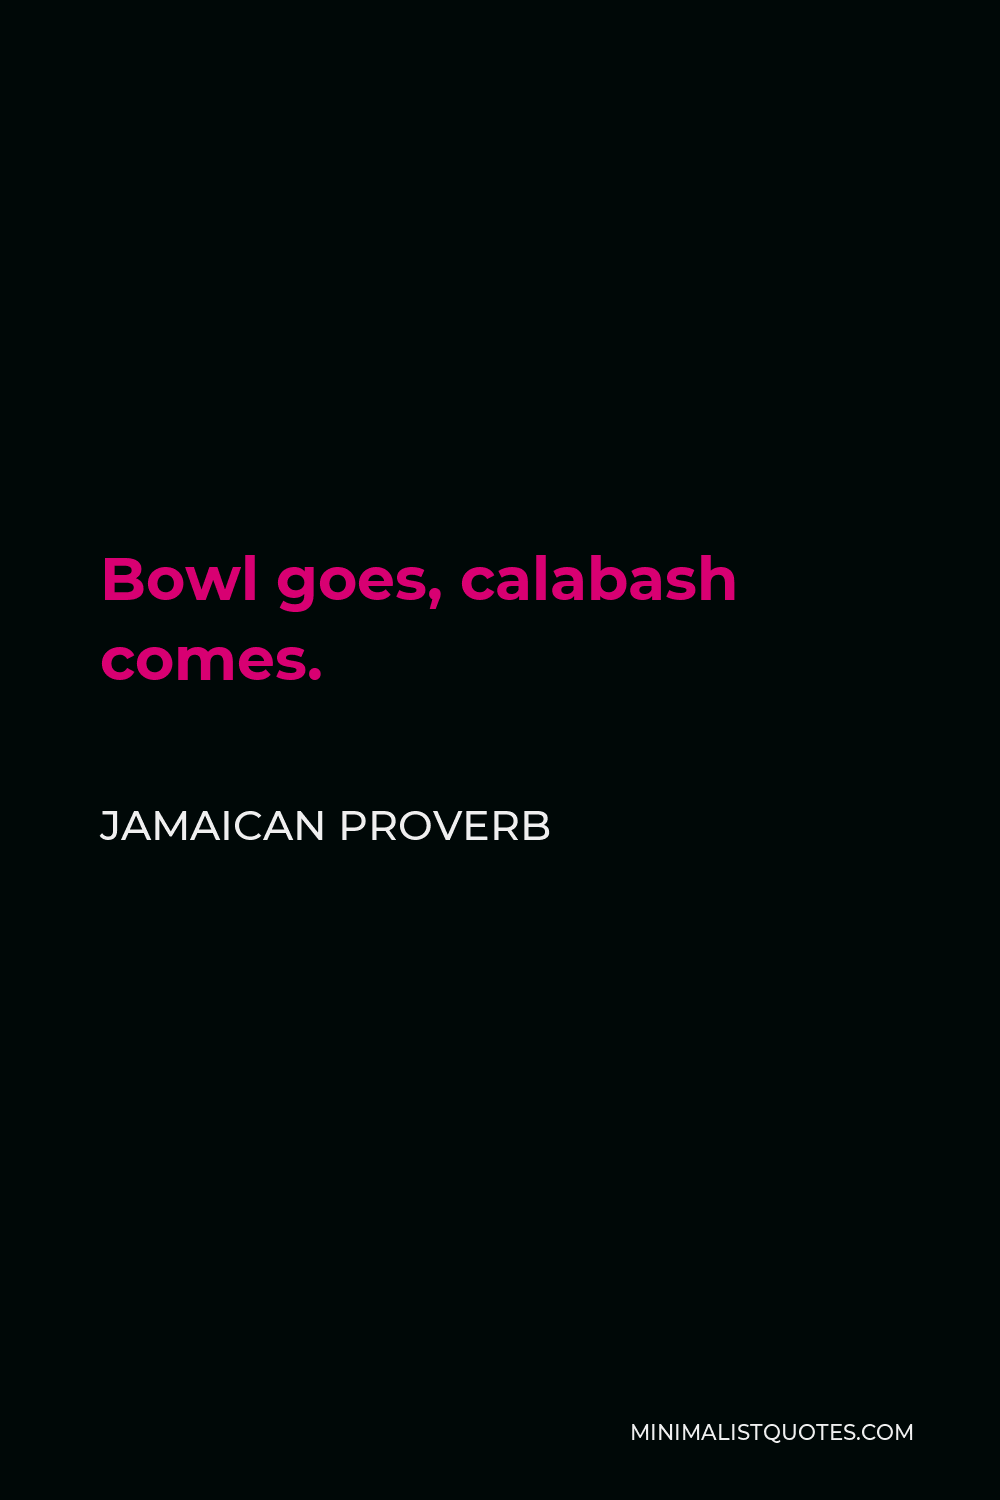 Jamaican Proverb Quote - Bowl goes, calabash comes.